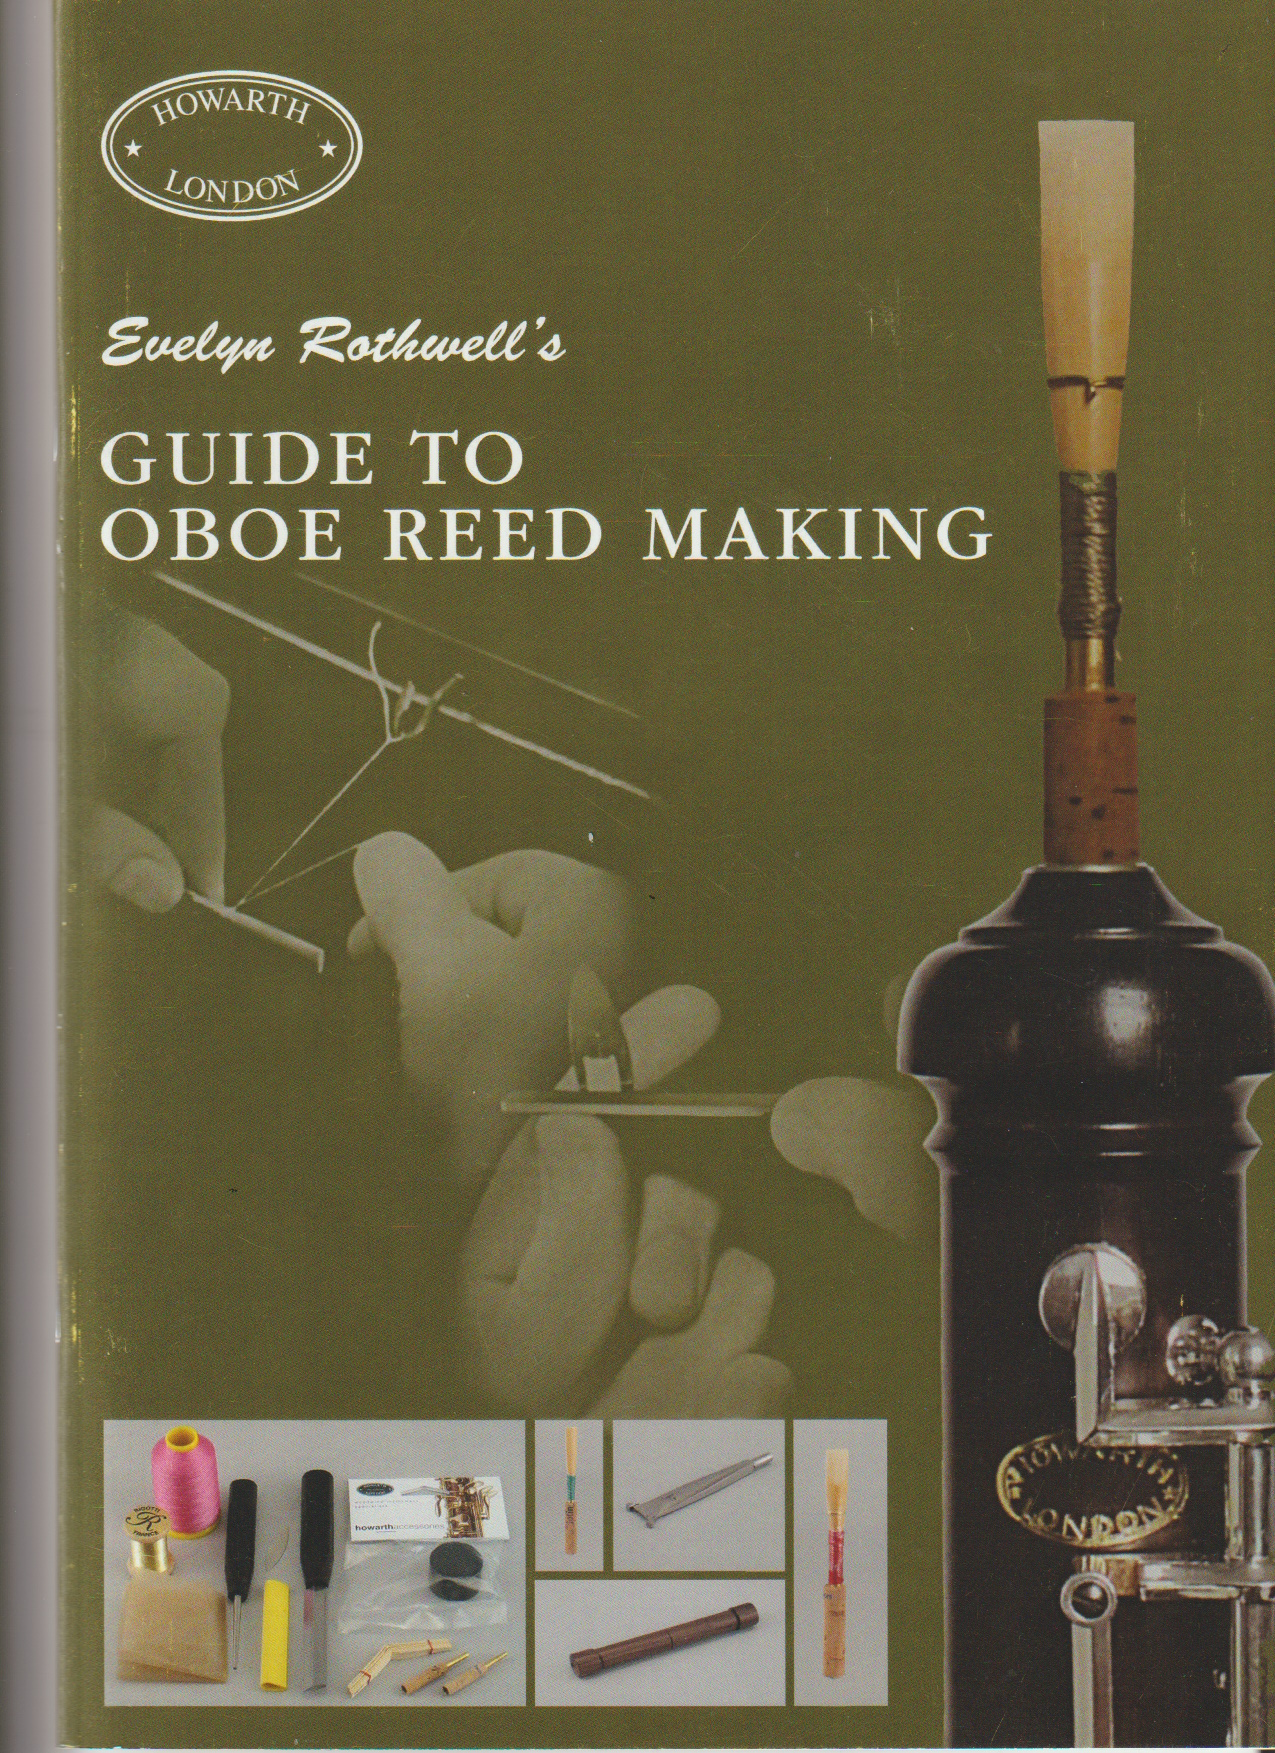 GUIDE TO OBOE REED MAKING